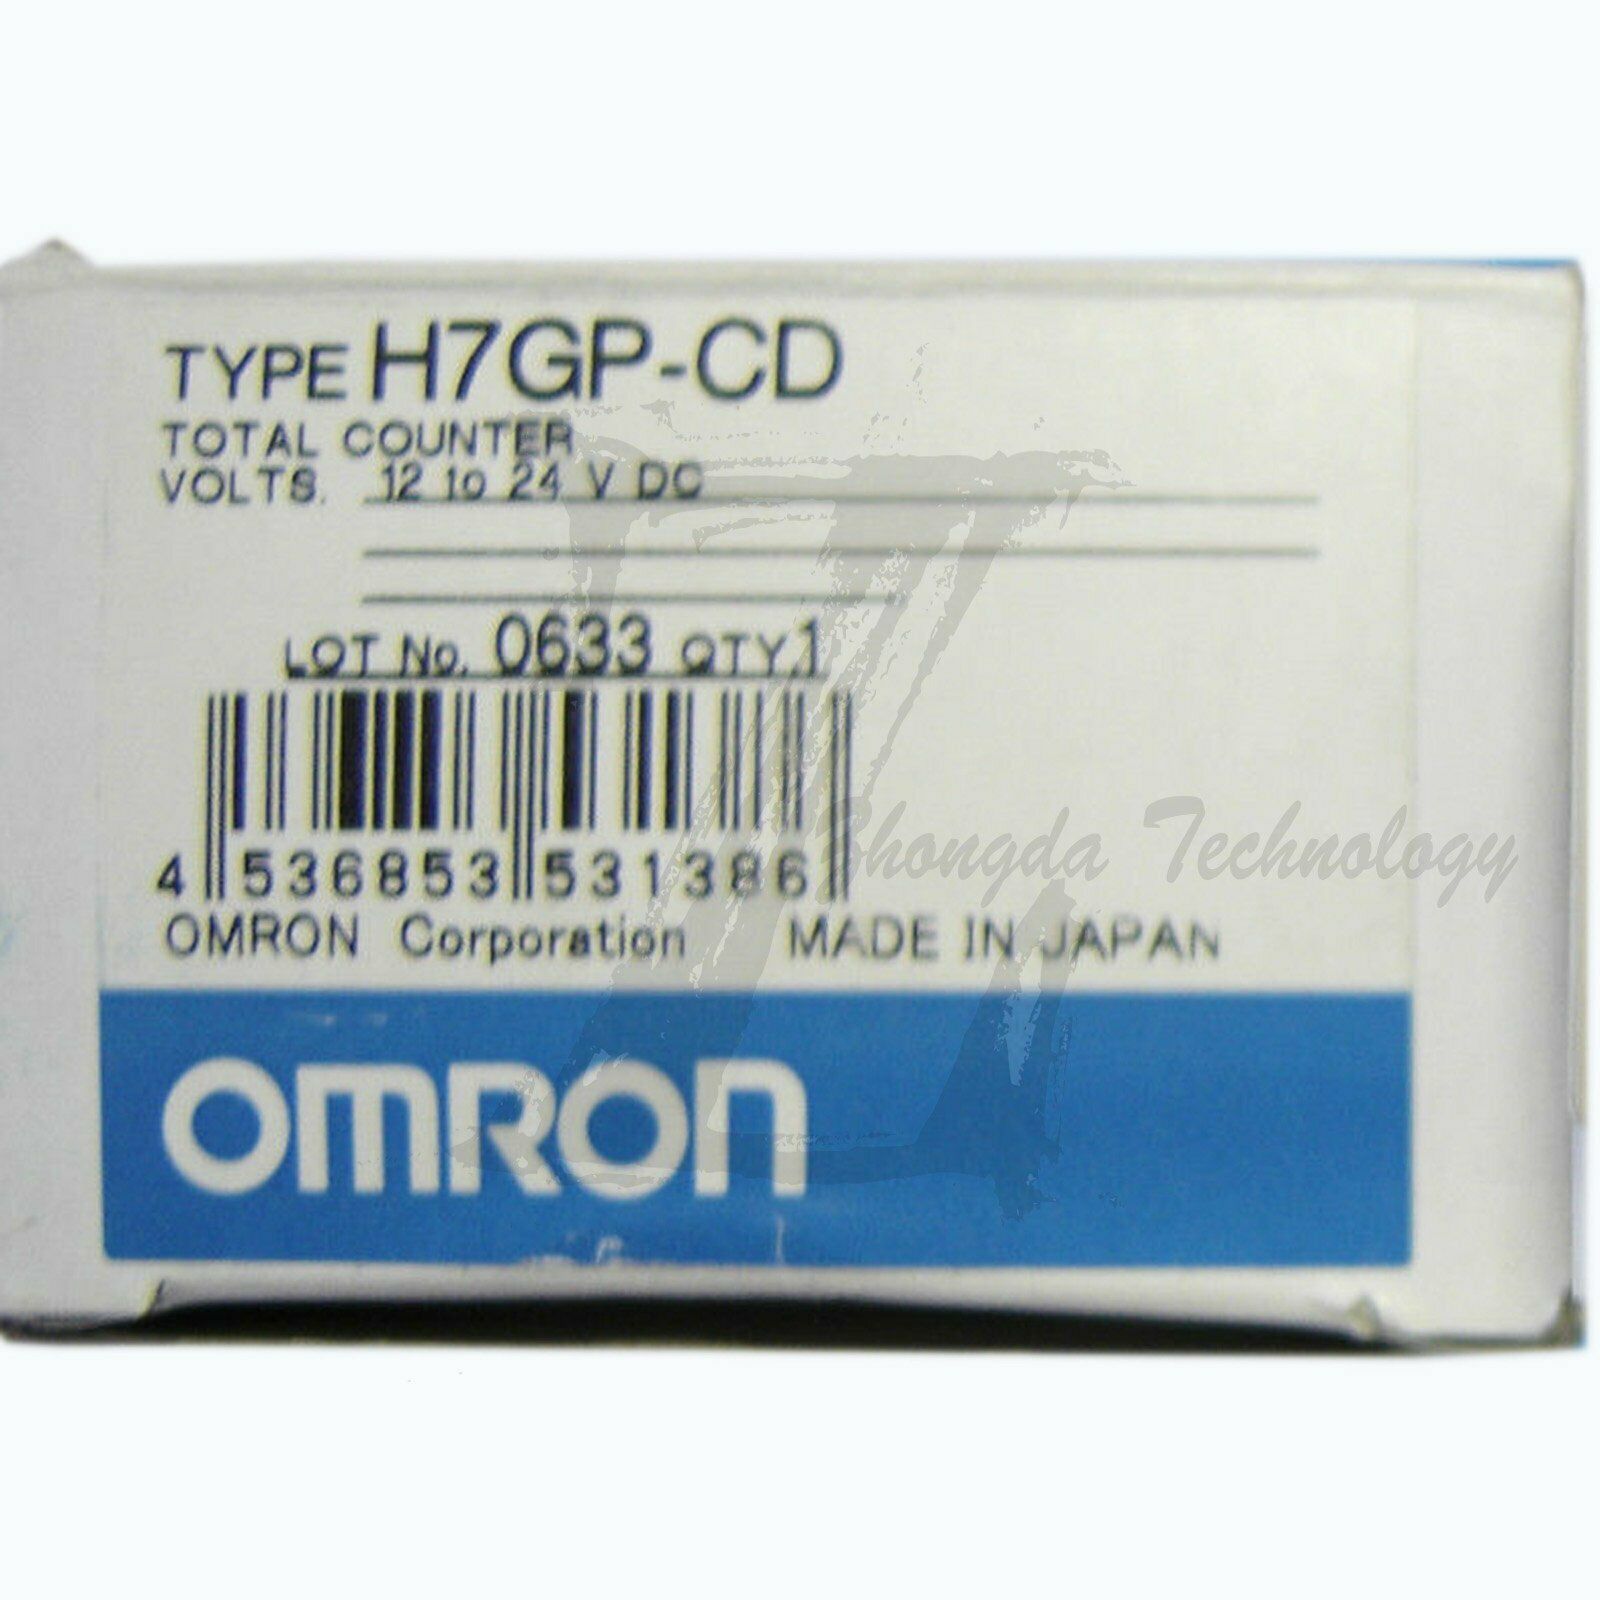 1pc new Omron H7GP-CD module one year warranty KOEED 201-500, 90%, import_2020_10_10_031751, Omron, Other